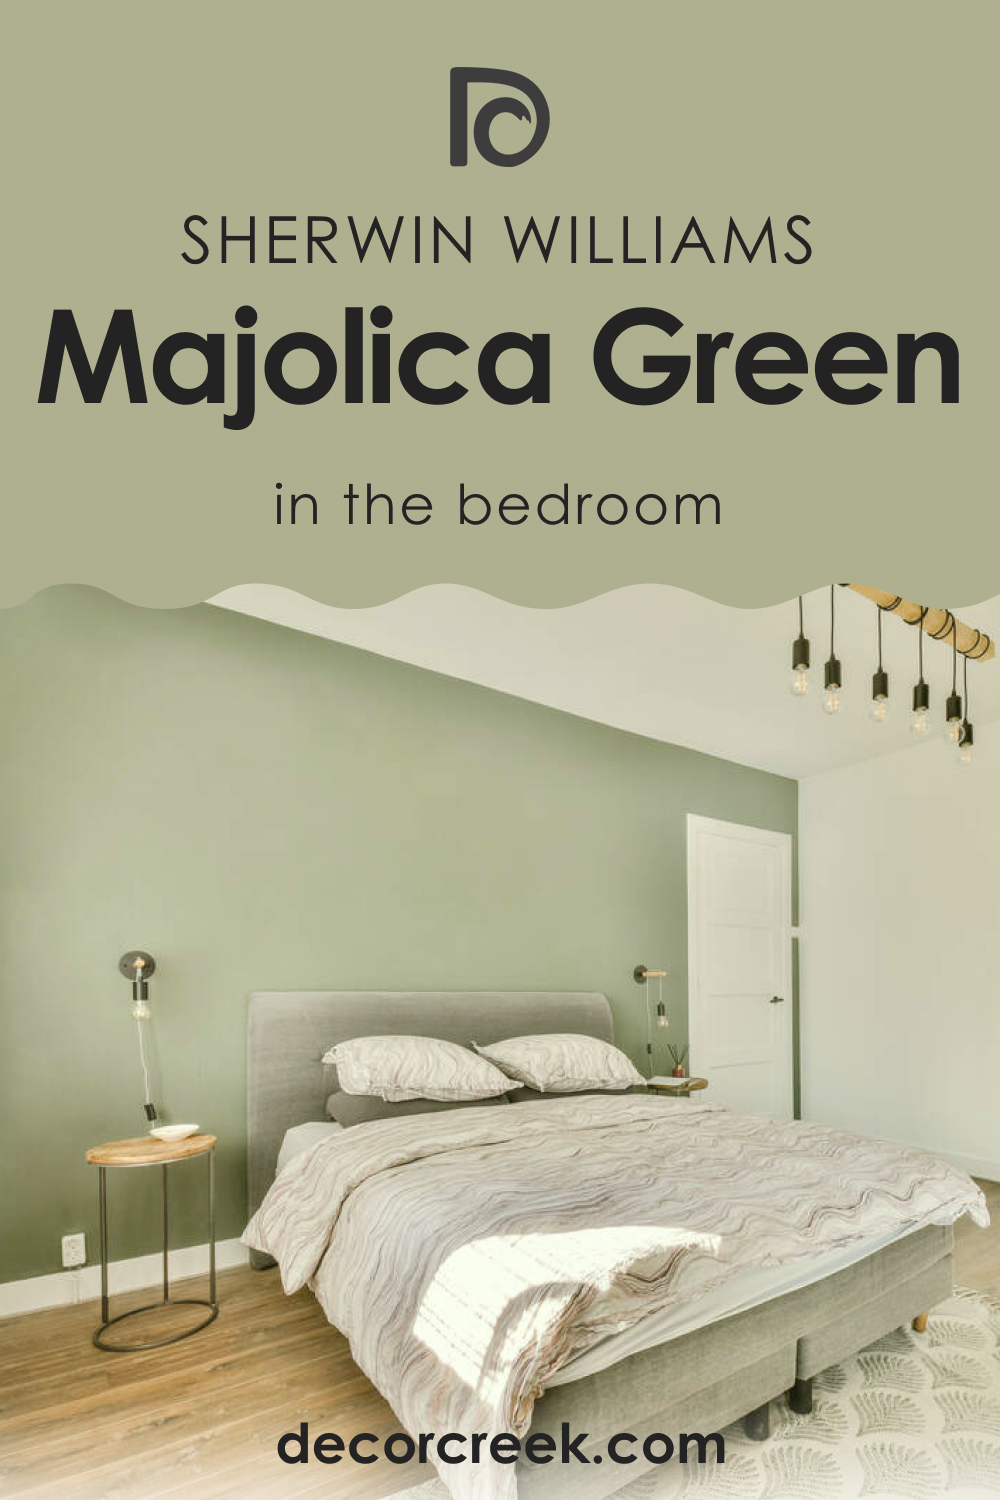 Majolica Green SW-0013 for the Bedroom